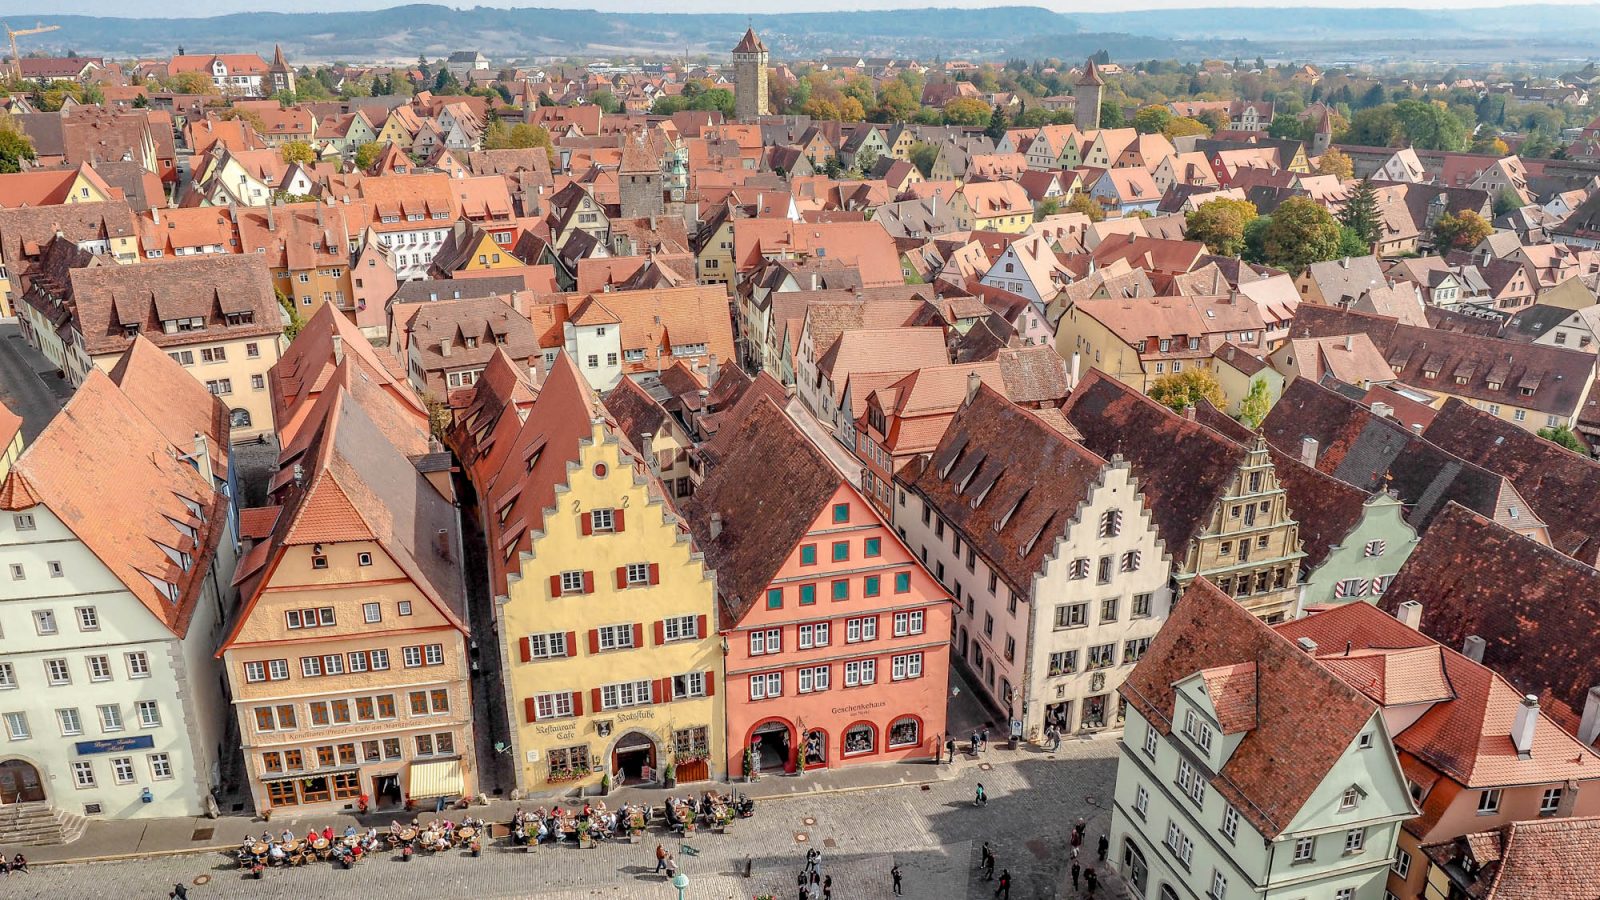 shot of the town from above with red rooftops and towers | One Day in Rothenburg ob der Tauber, Germany: What to do, see, eat, and more. | Rothenburg day trip from Munich, Frankfurt, and others. Rothenburg itinerary for summer, fall, winter, spring. Festivals, things to do, where to park, and where to stay.